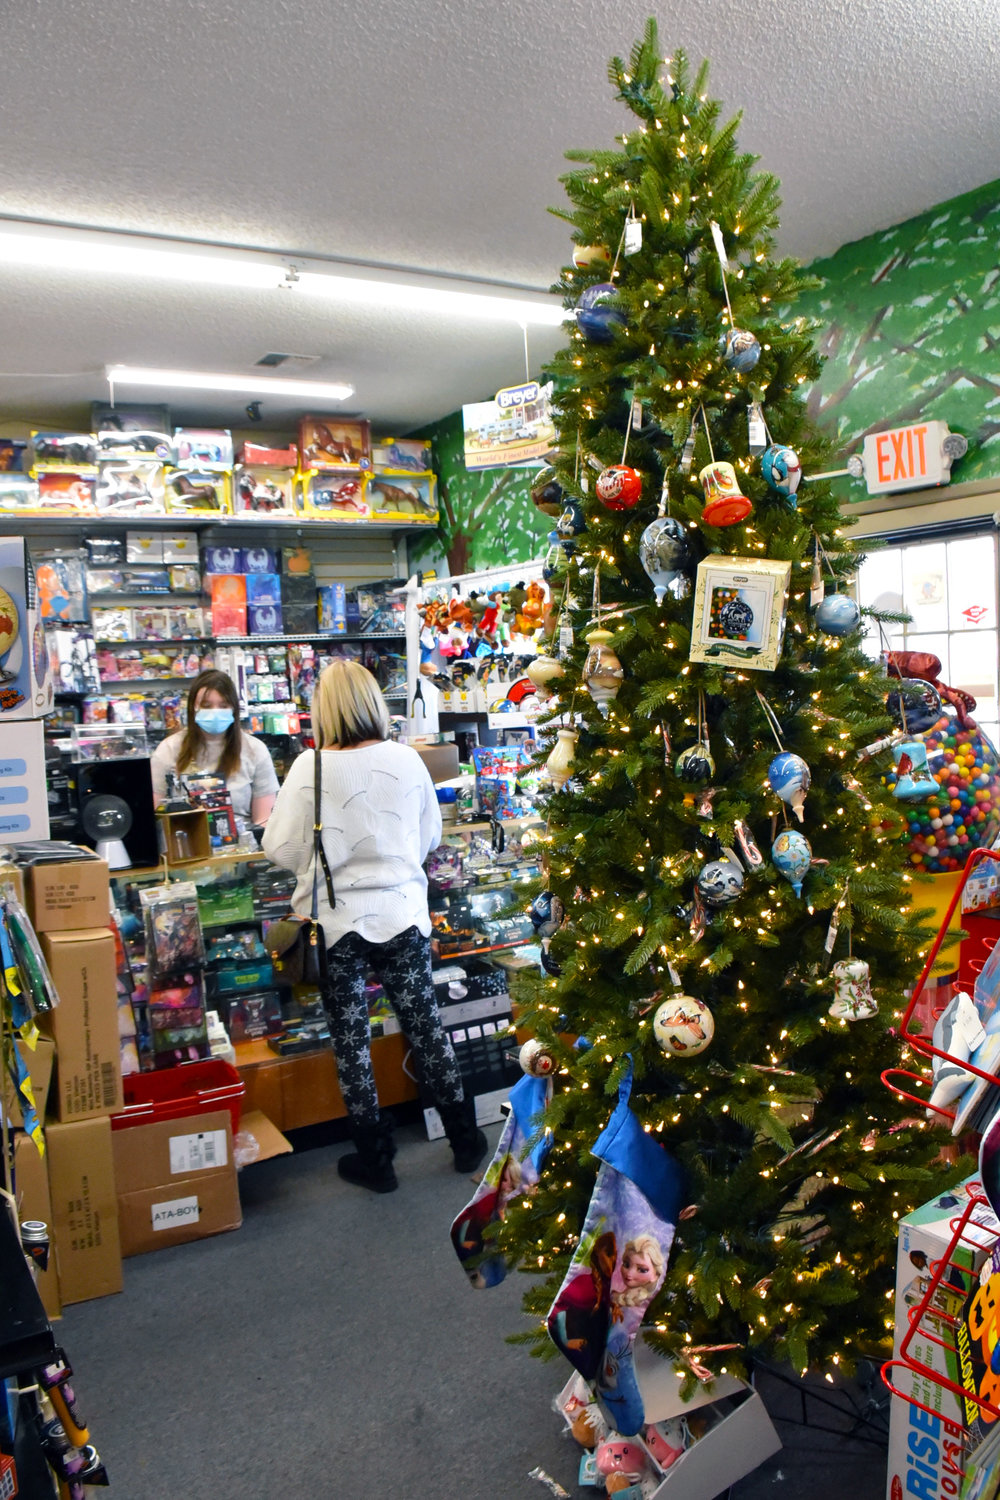 Funtime Toys and Gifts saw steady holiday foot traffic this Christmas season.